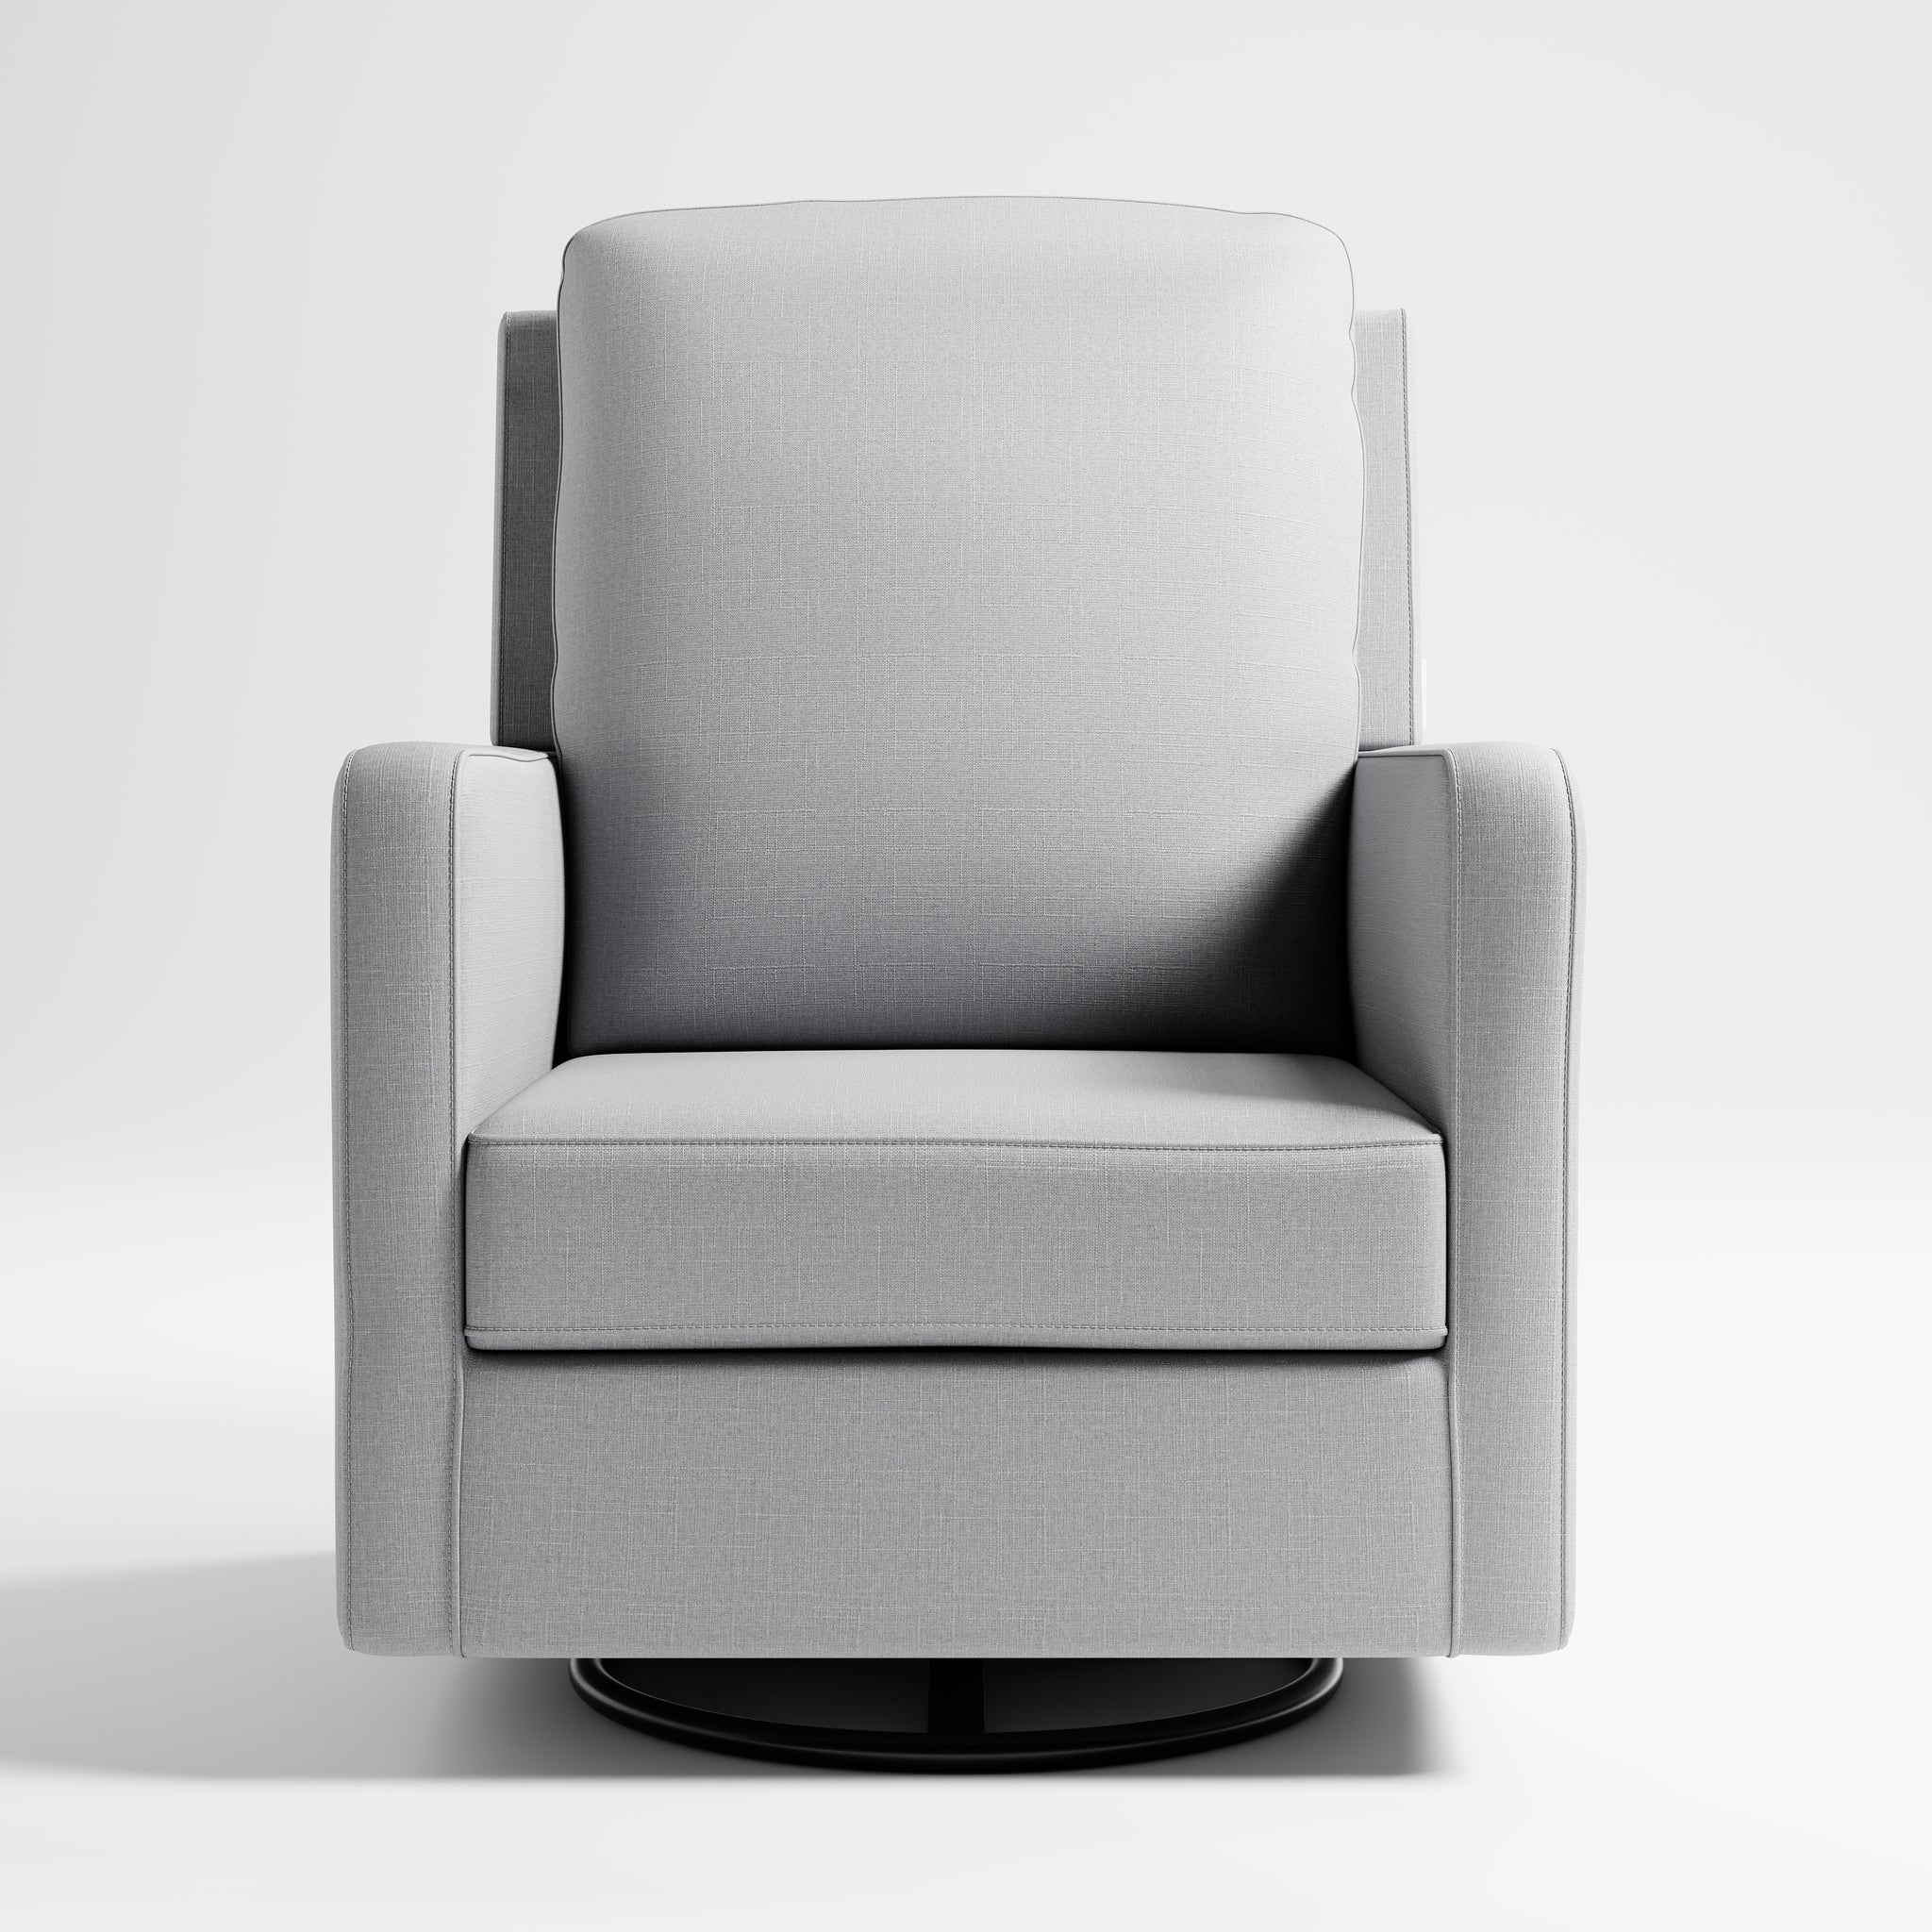 Front view of swivel glider with fog fabric